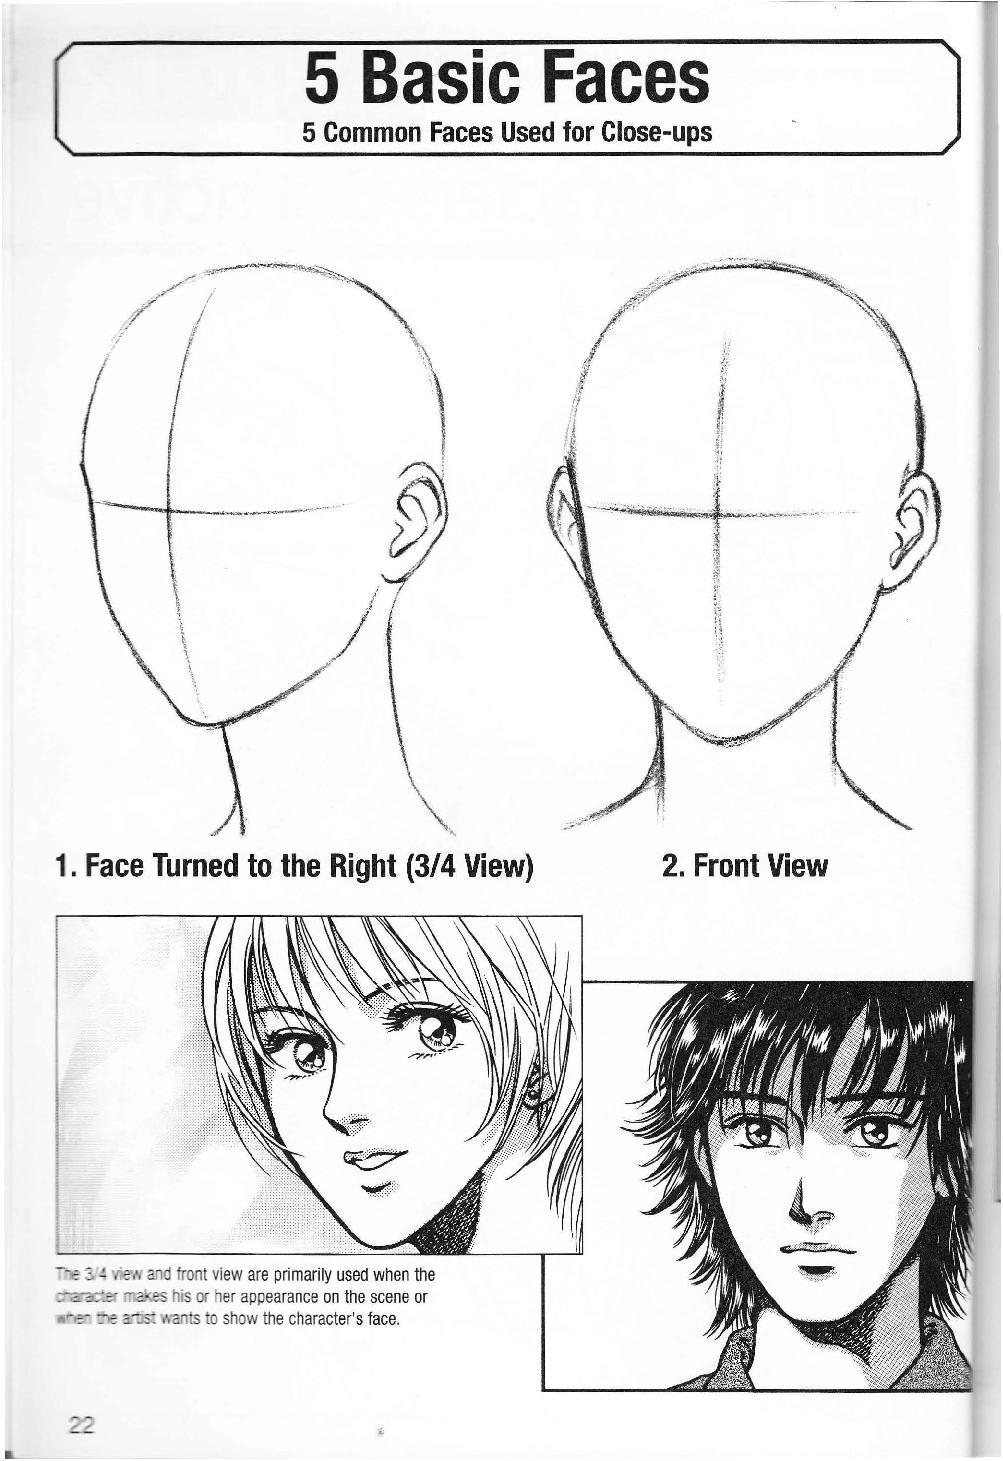 More How to Draw Manga Vol. 2 - Penning Characters 23